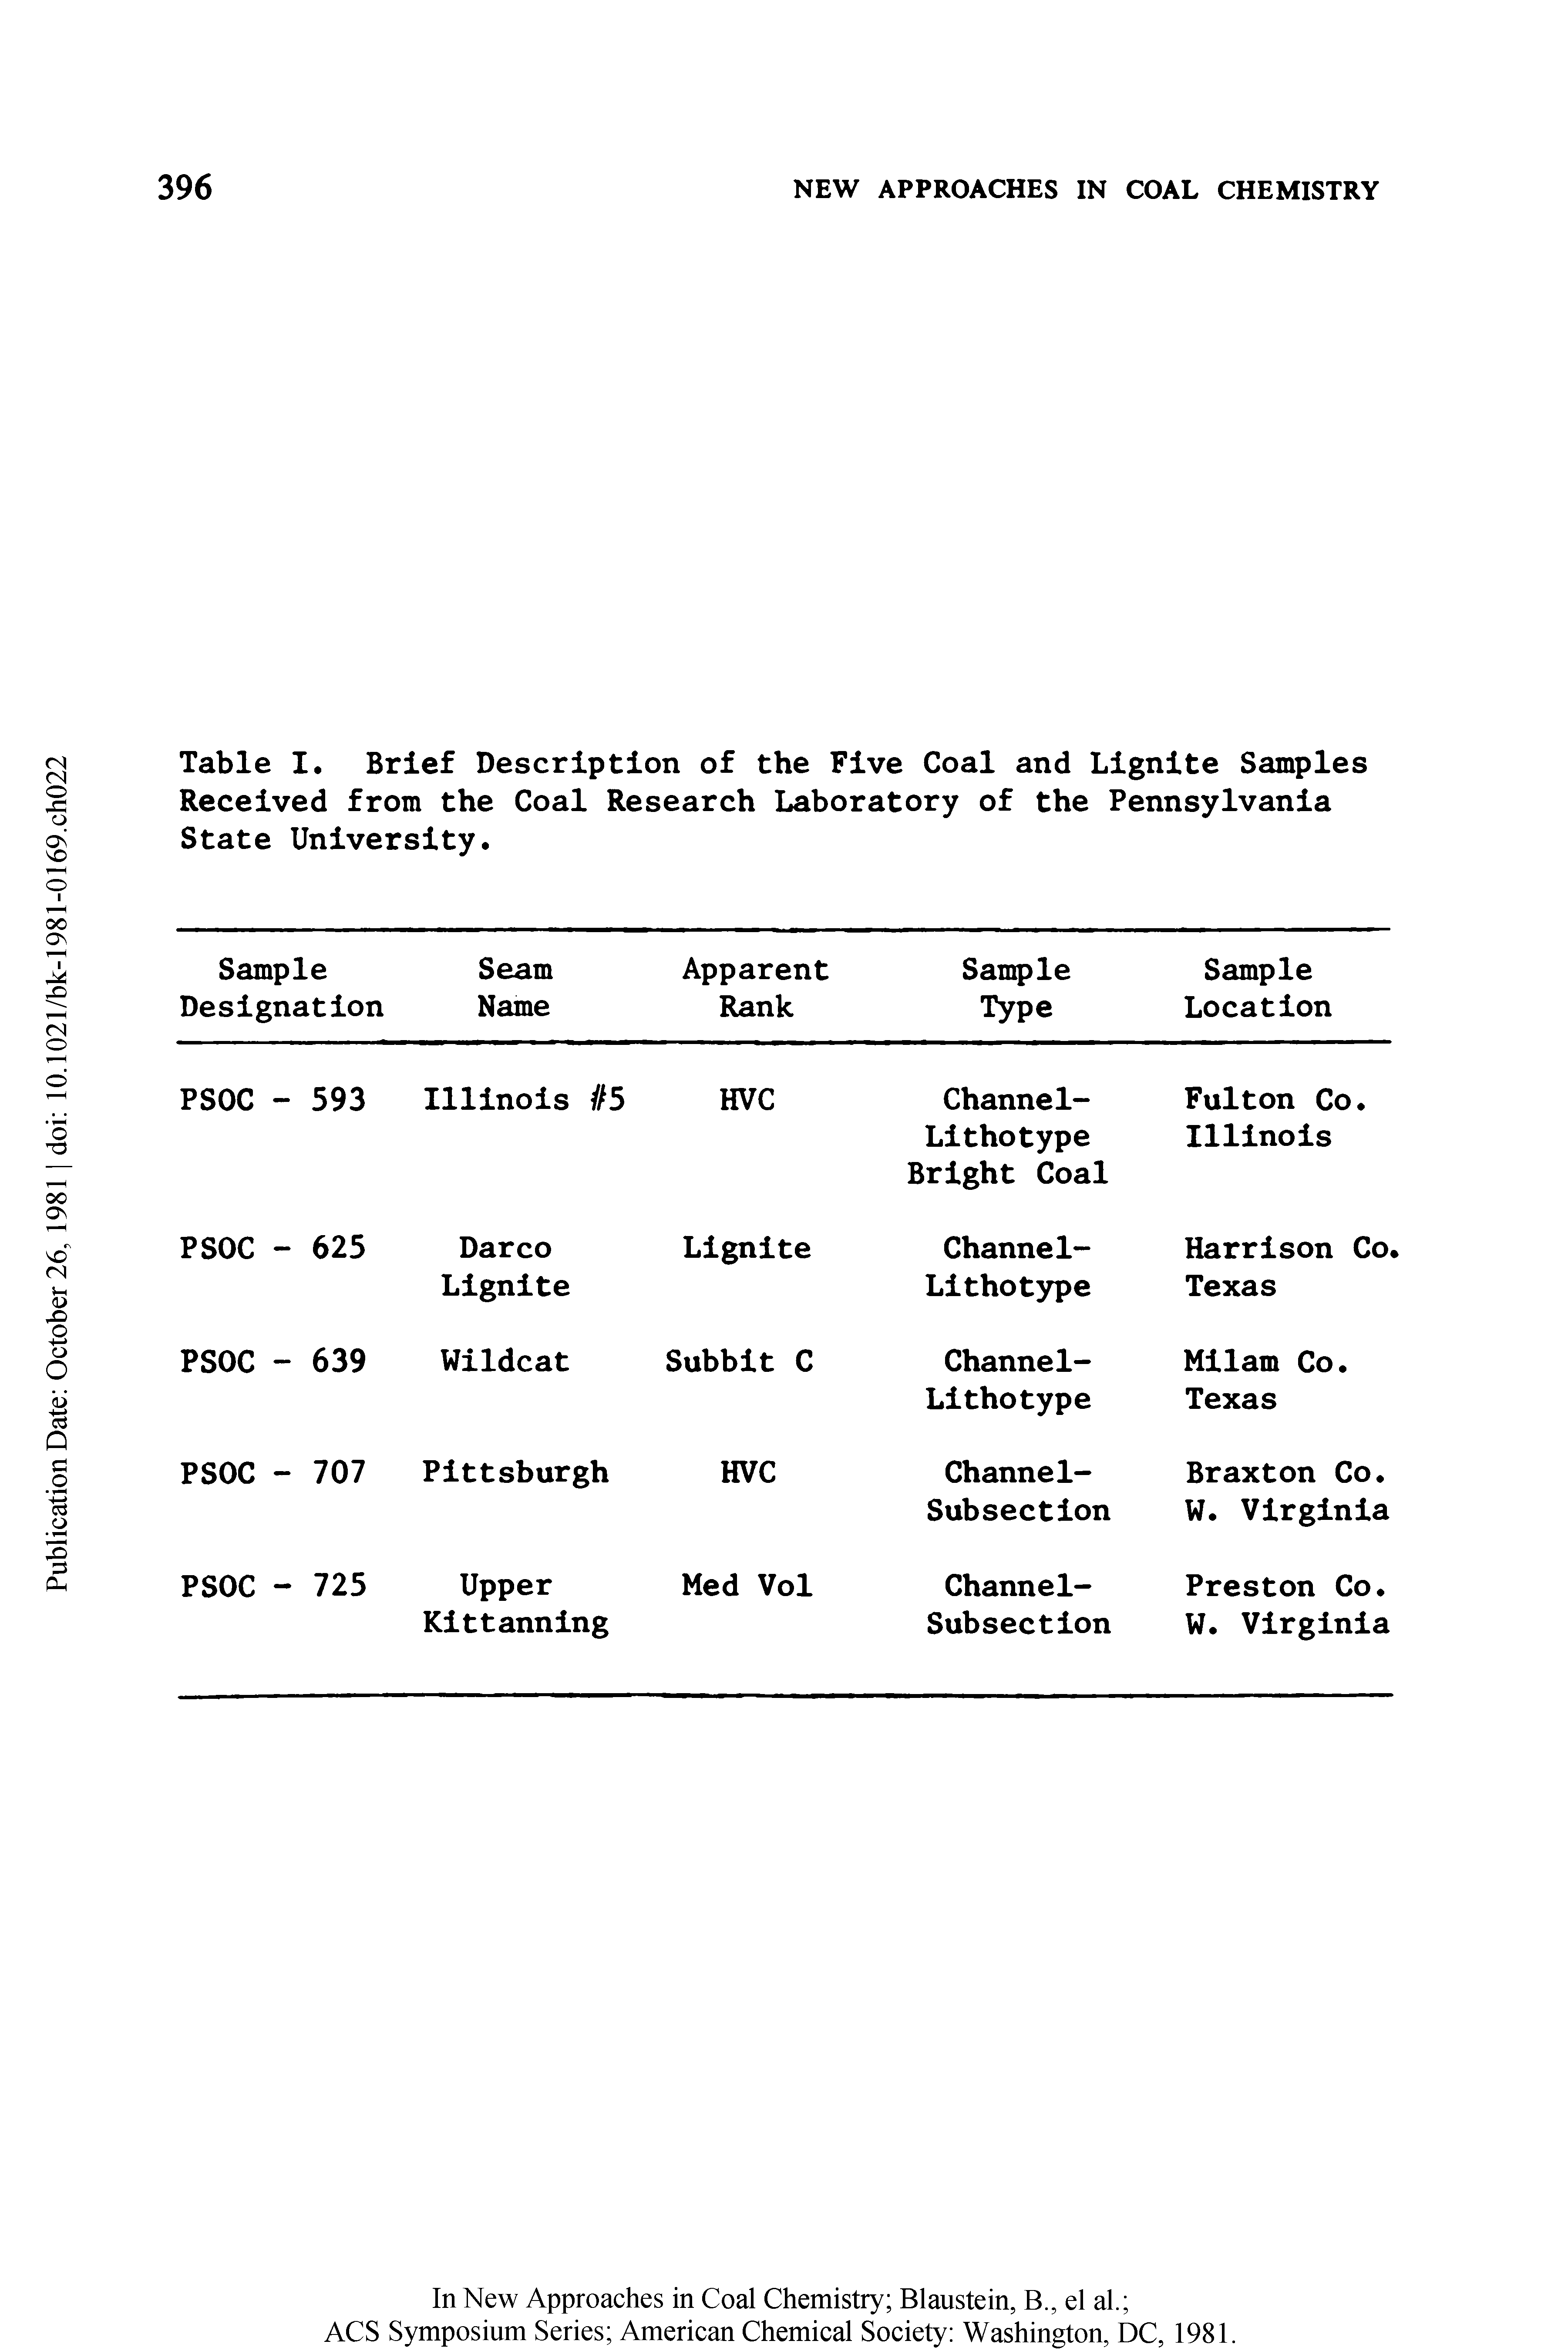 Table I. Brief Description of the Five Coal and Lignite Samples Received from the Coal Research Laboratory of the Pennsylvania State University.